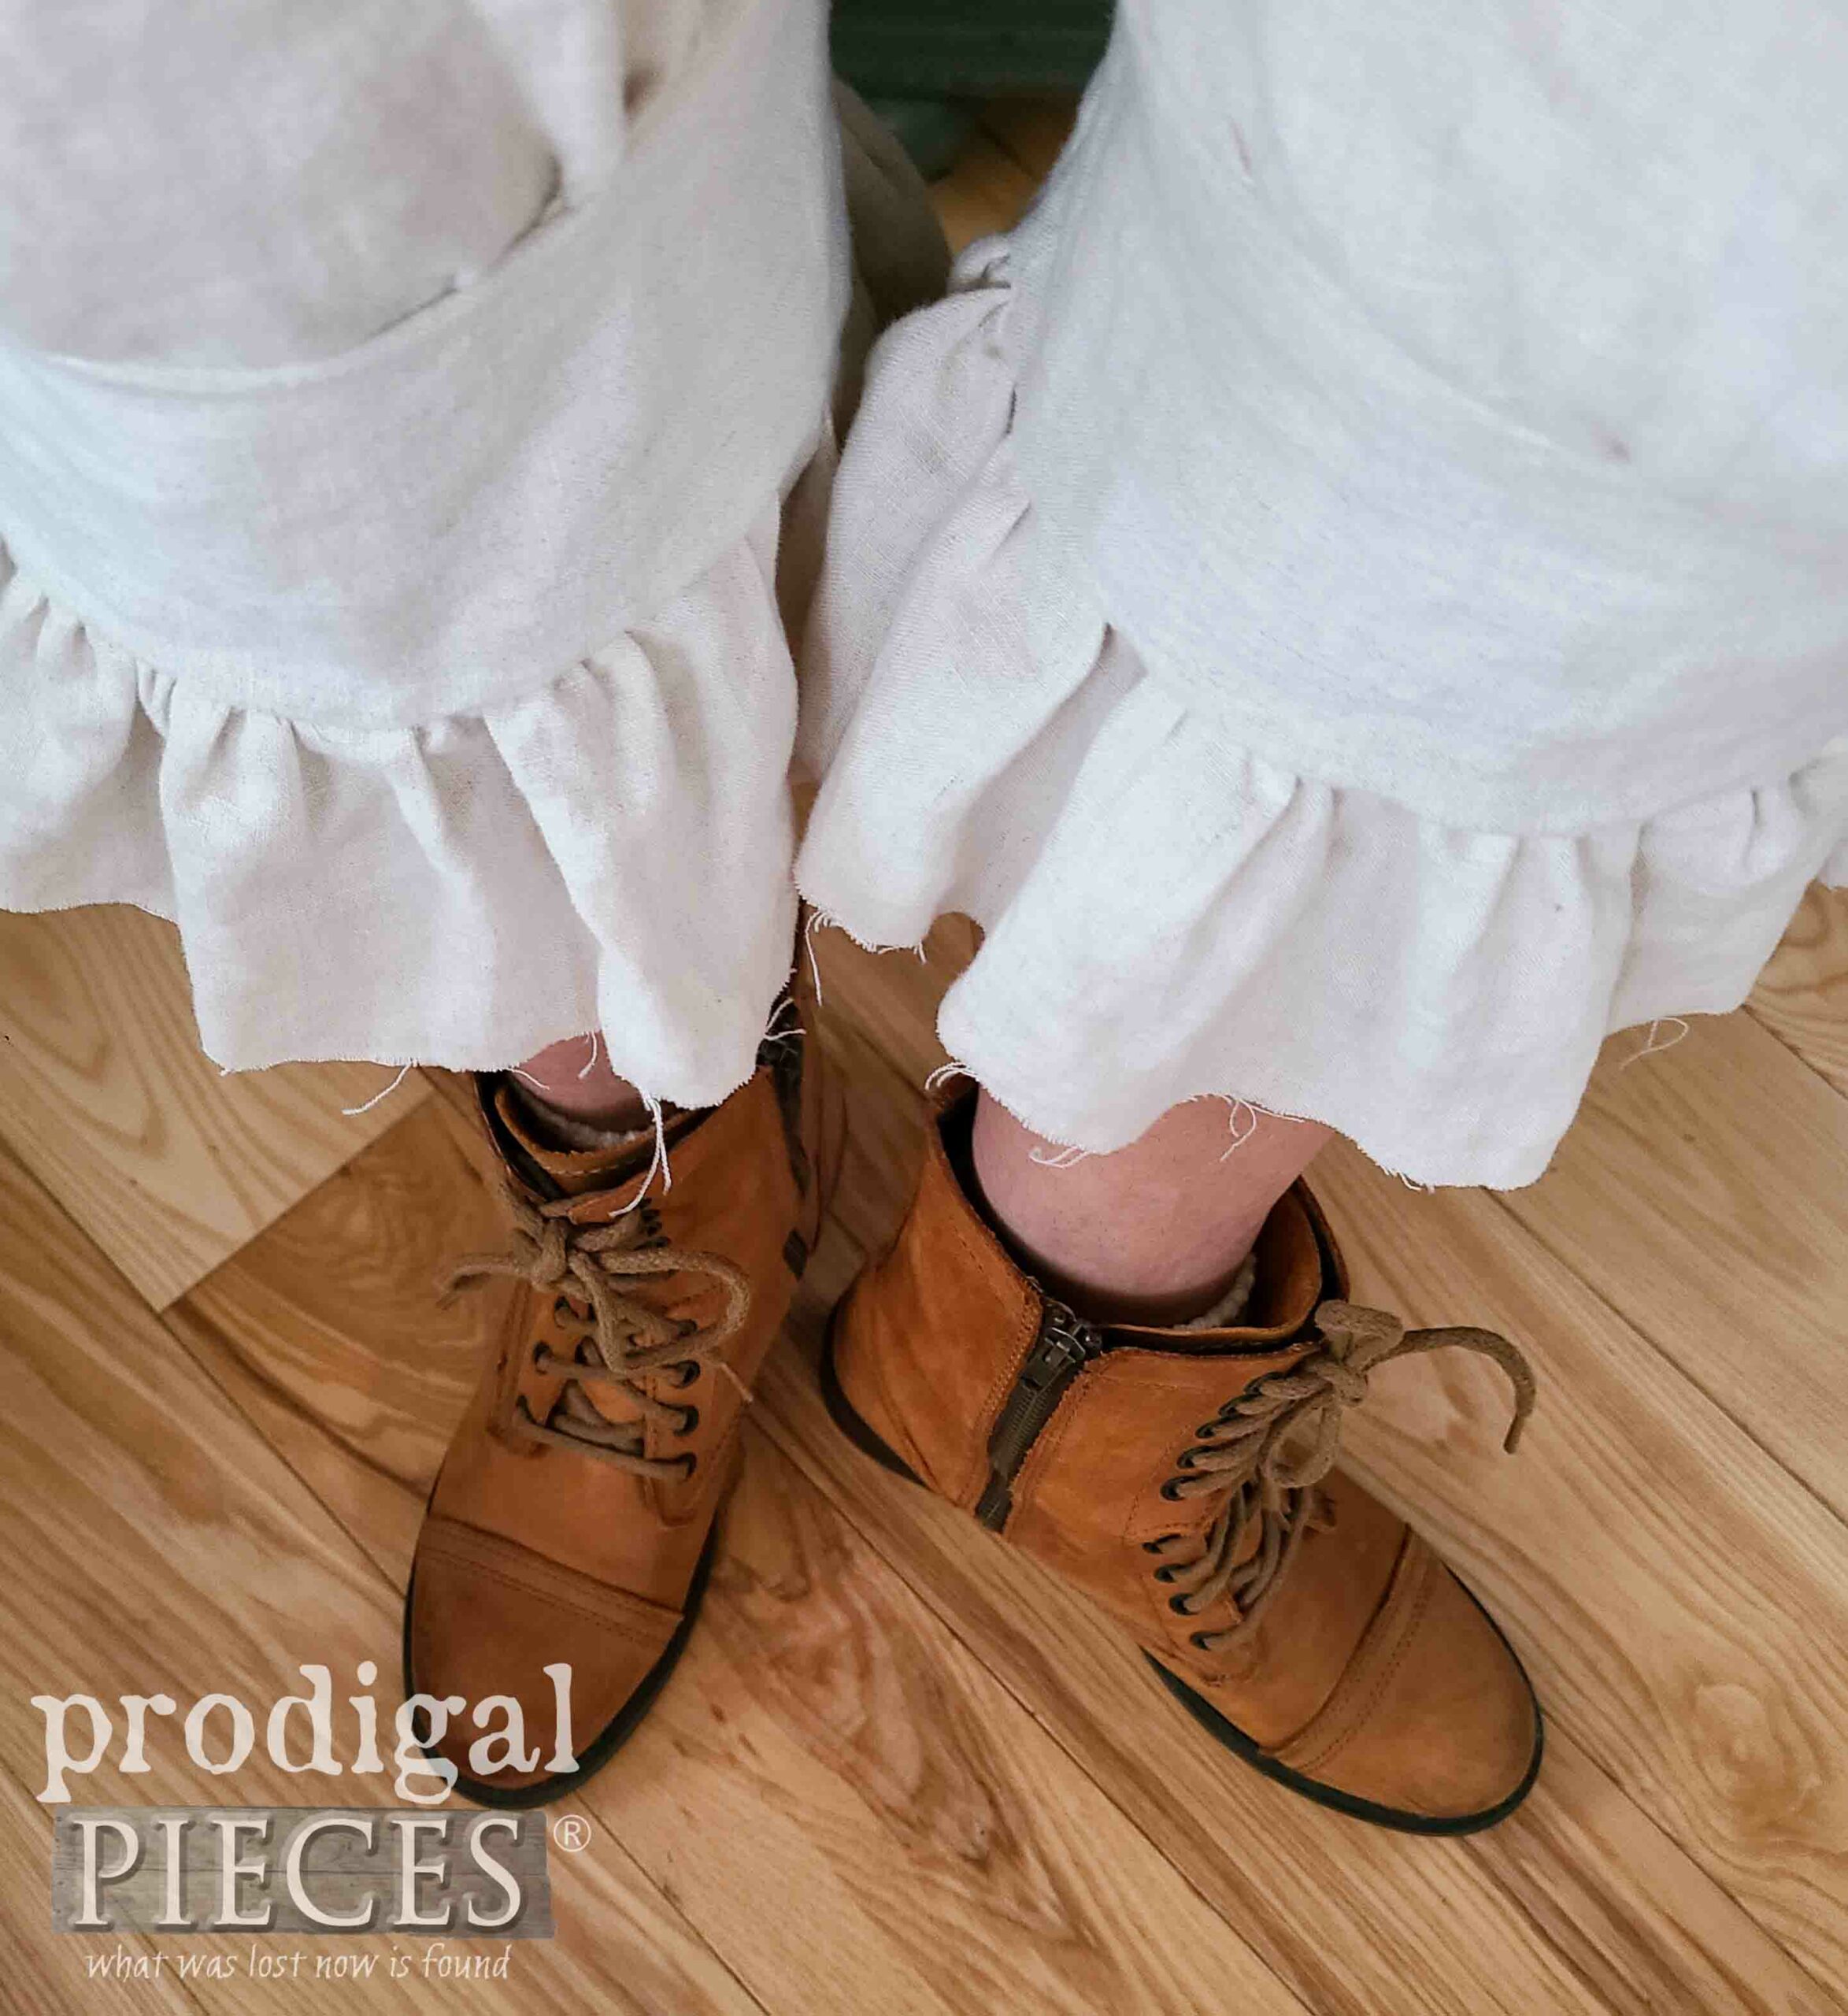 Refashioned Linen Bloomers from Bedsheet by Larissa of Prodigal Pieces | prodigalpieces.com #prodigalpieces #linen #fashion #upcycled